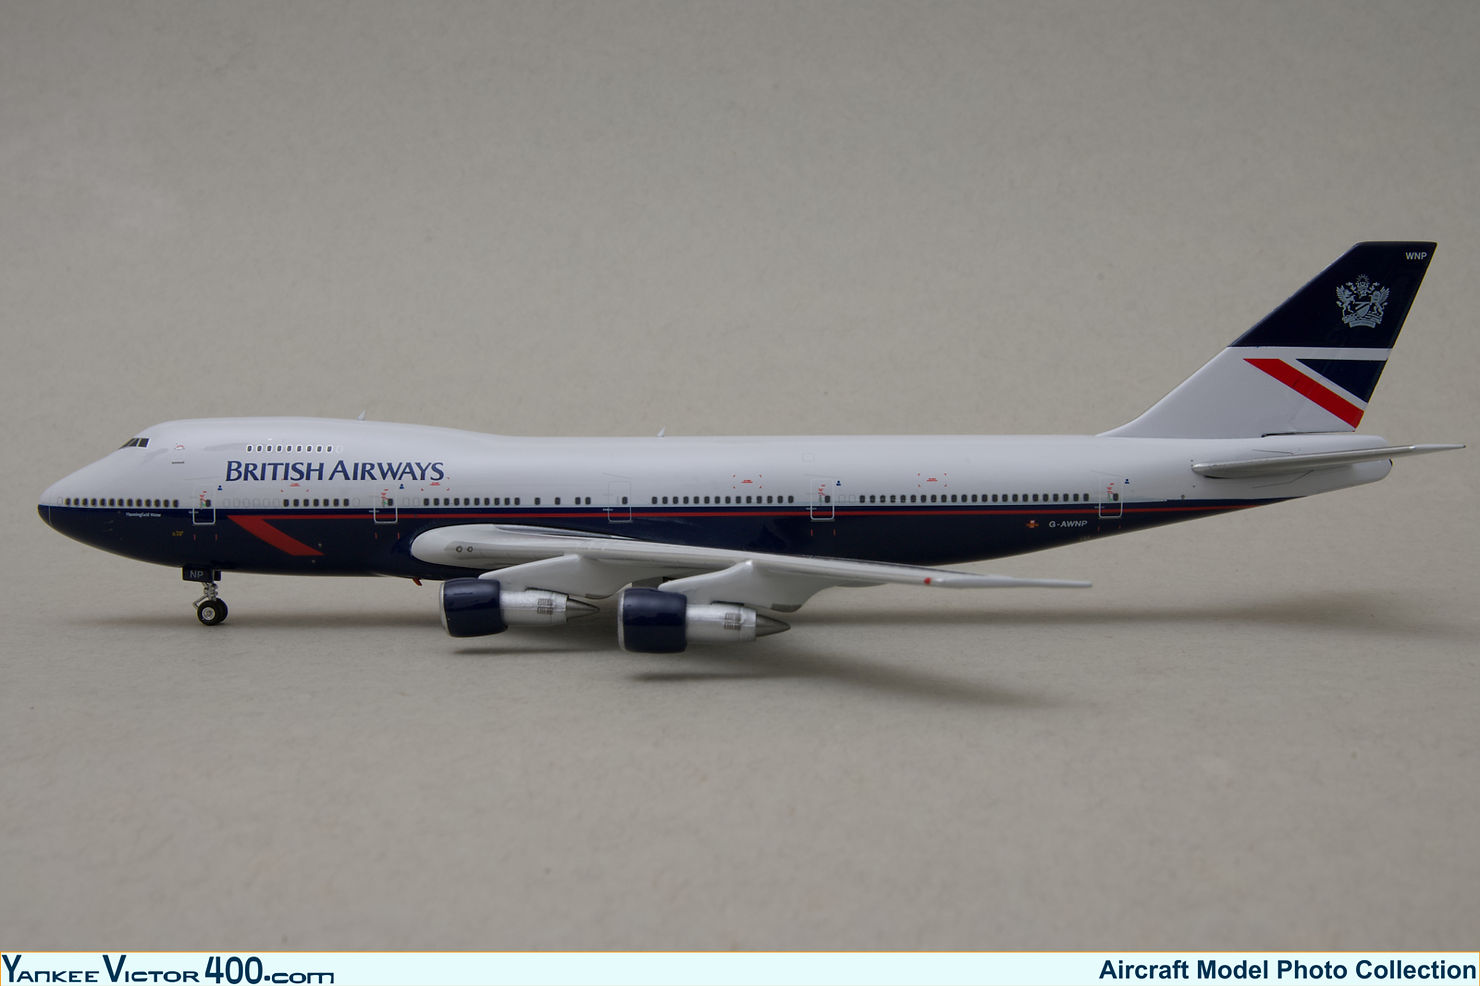 Scale aircraft model of a British Airways Boeing 747-136 registered G-AWNP made by Phoenix Models in 1:400 scale.